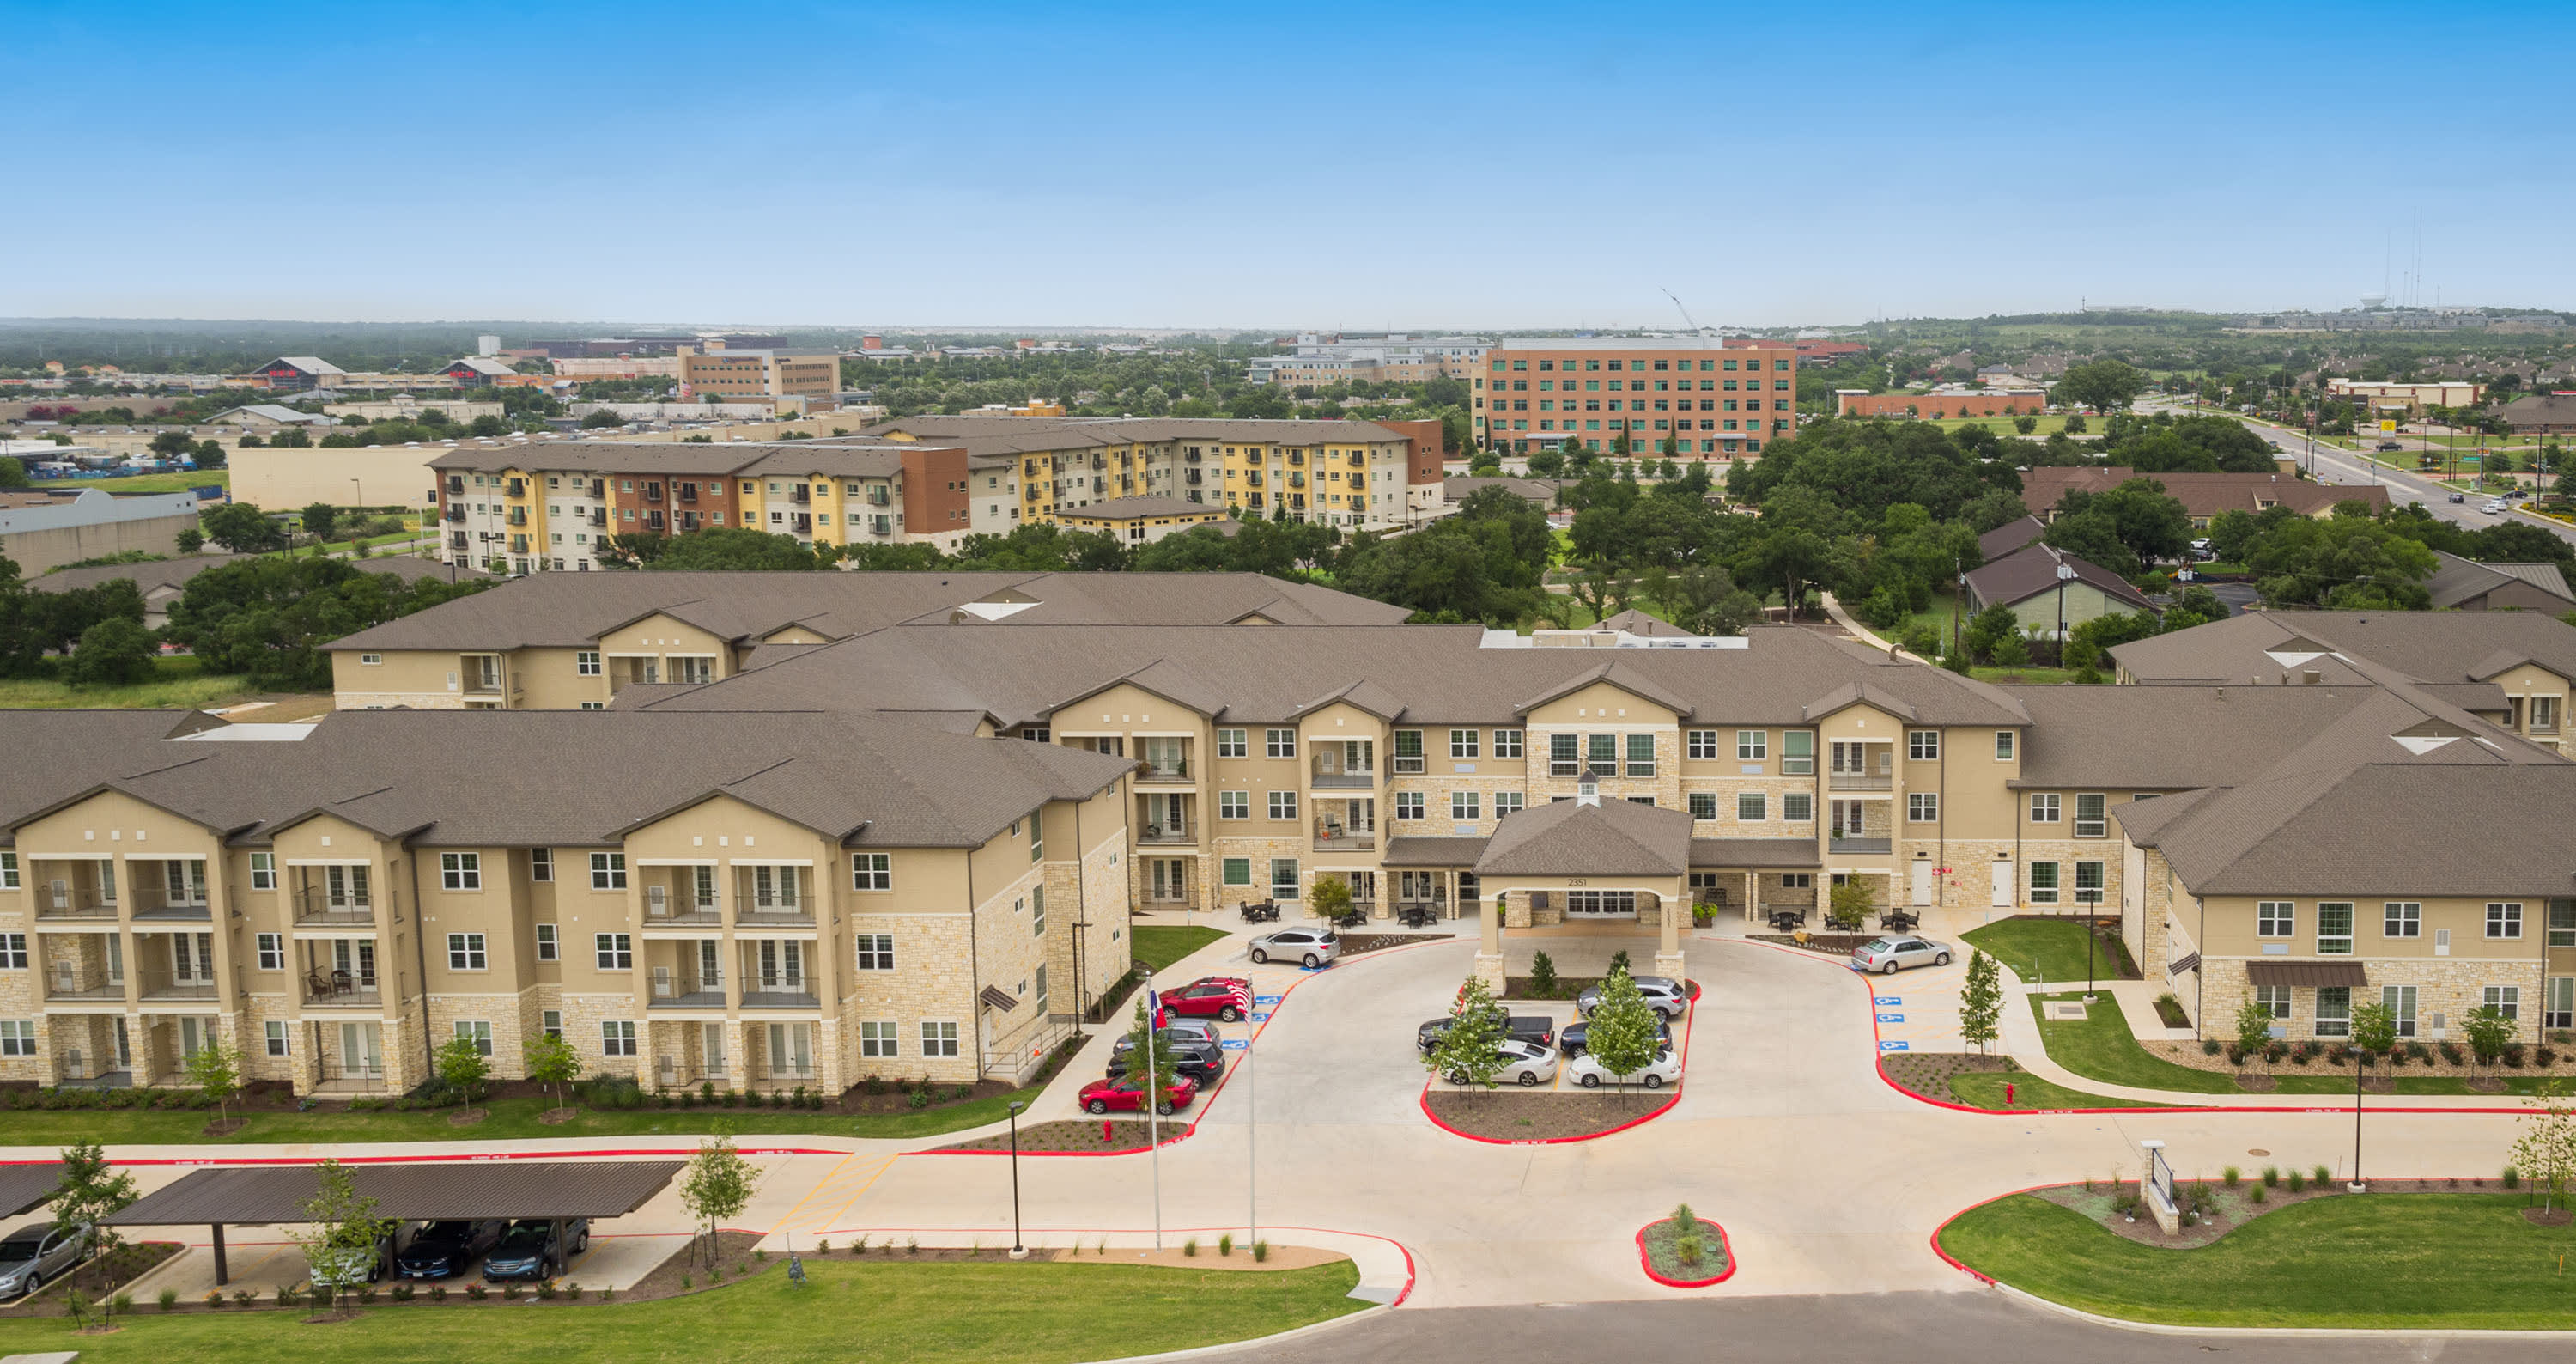 The Enclave at Round Rock Senior Living aerial view of community